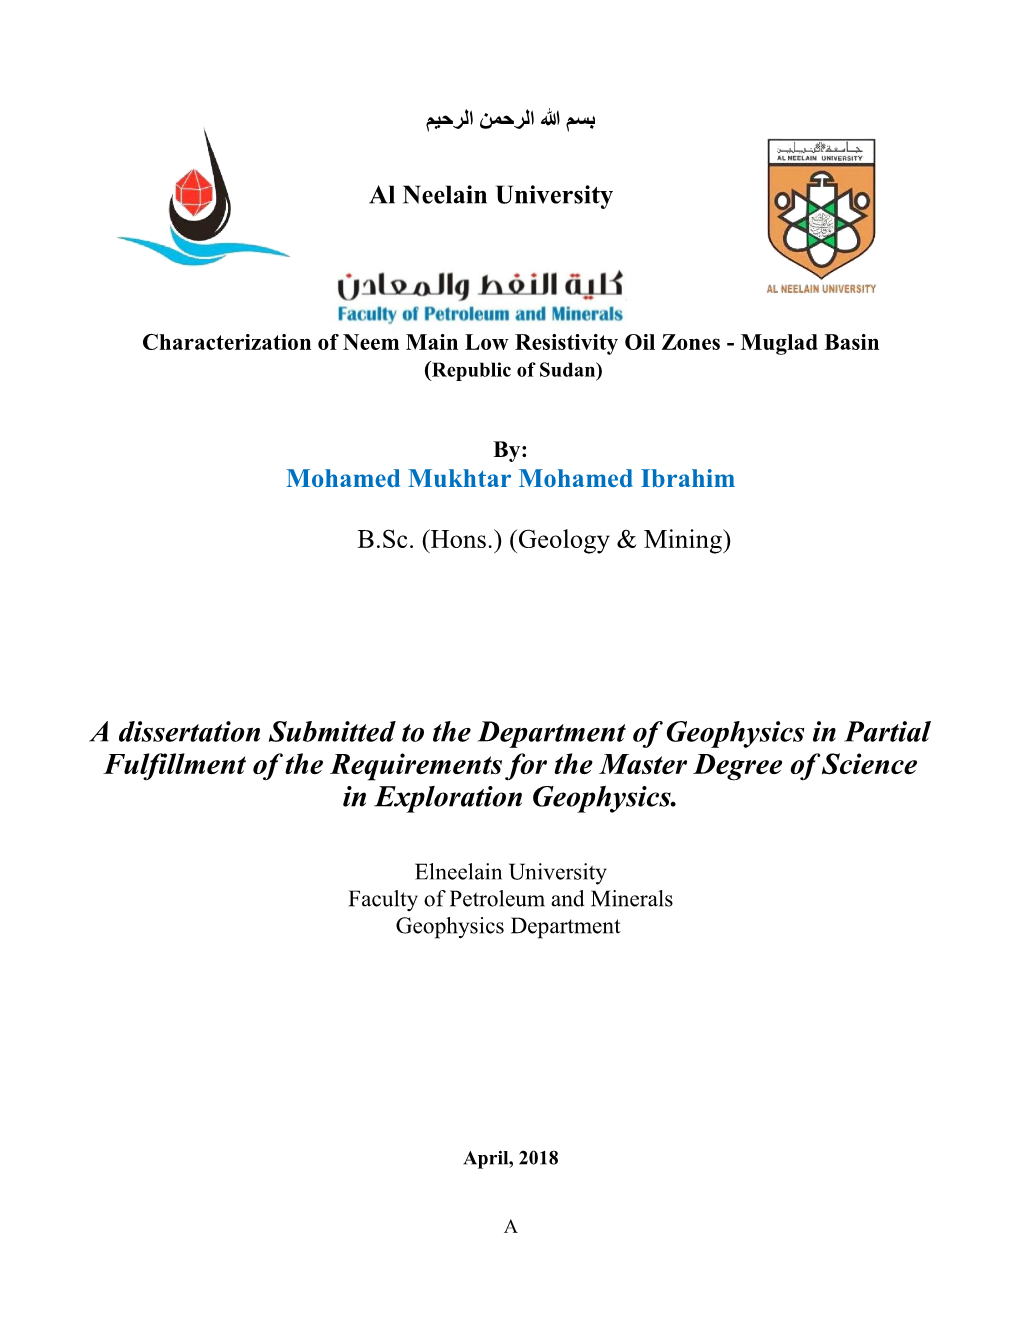 A Dissertation Submitted to the Department of Geophysics in Partial Fulfillment of the Requirements for the Master Degree of Science in Exploration Geophysics